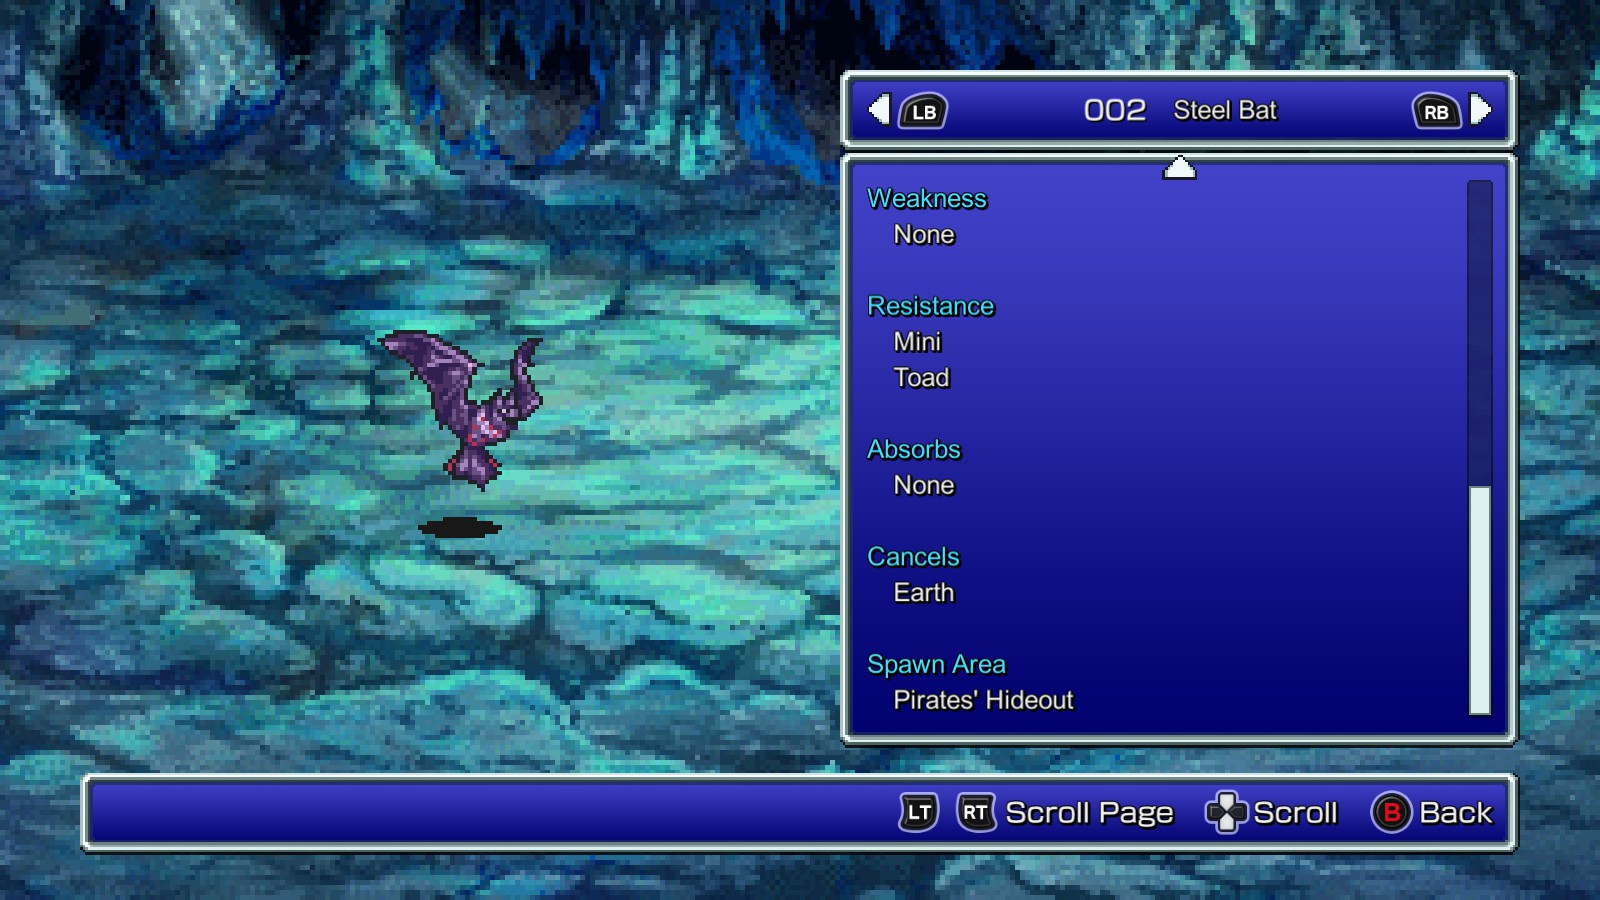 FINAL FANTASY V Blue Mage Spells + All Collection Points - Blue Mage spells (in order of their earliest appearance) - 850F9DE